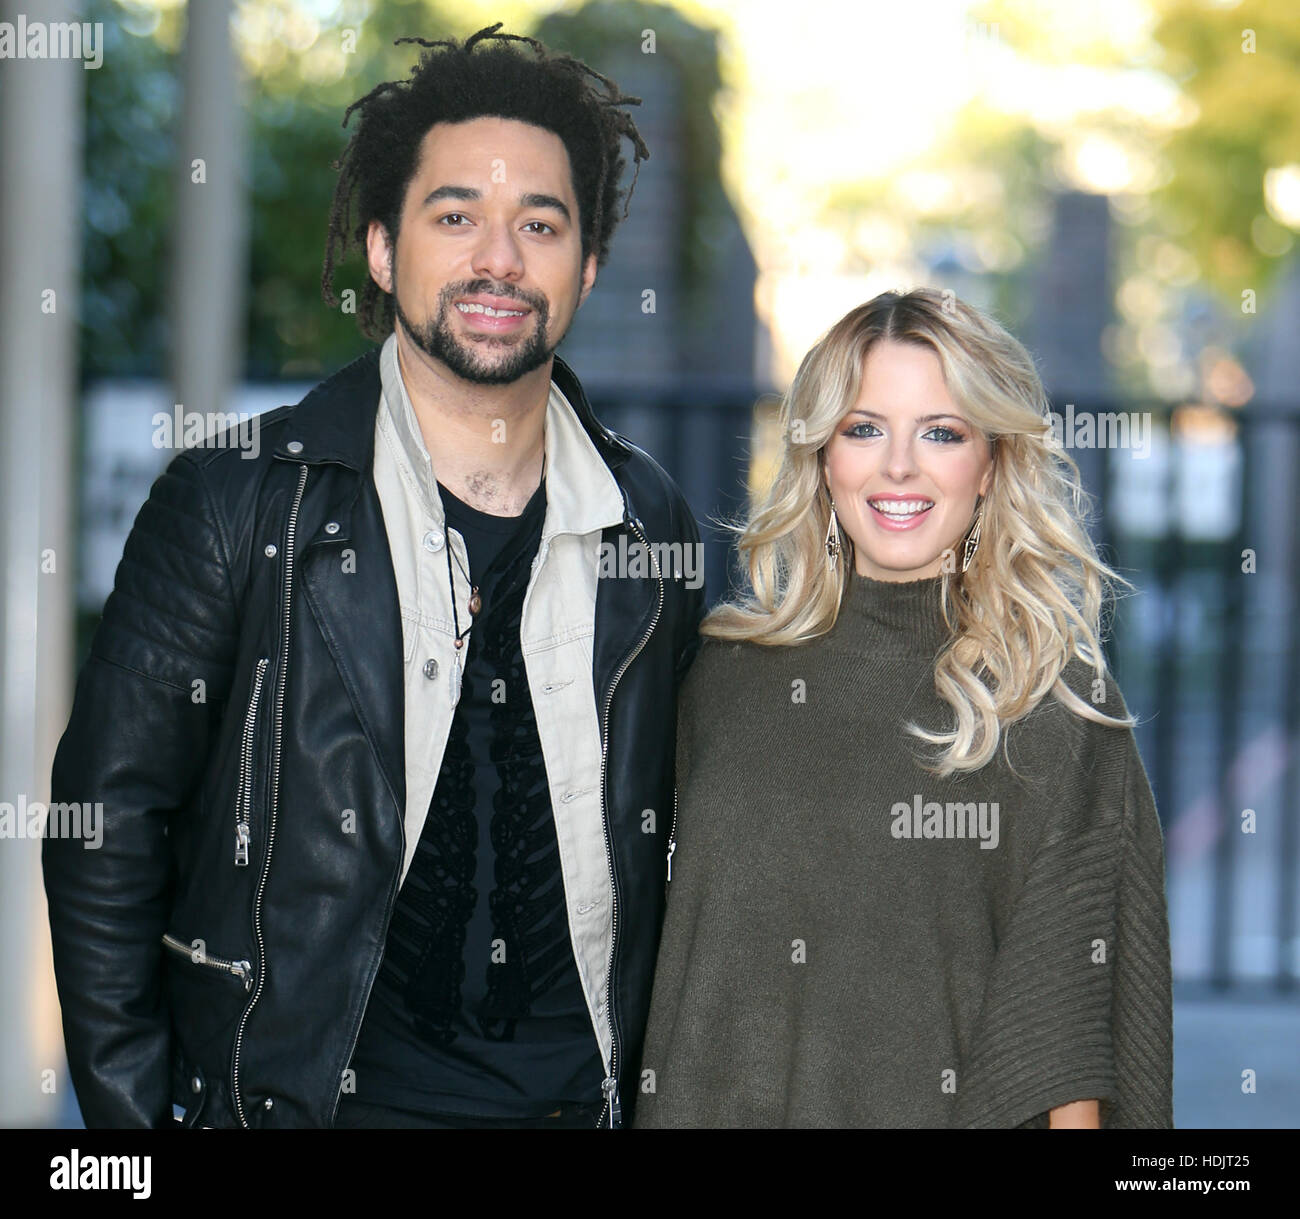 the shires dating